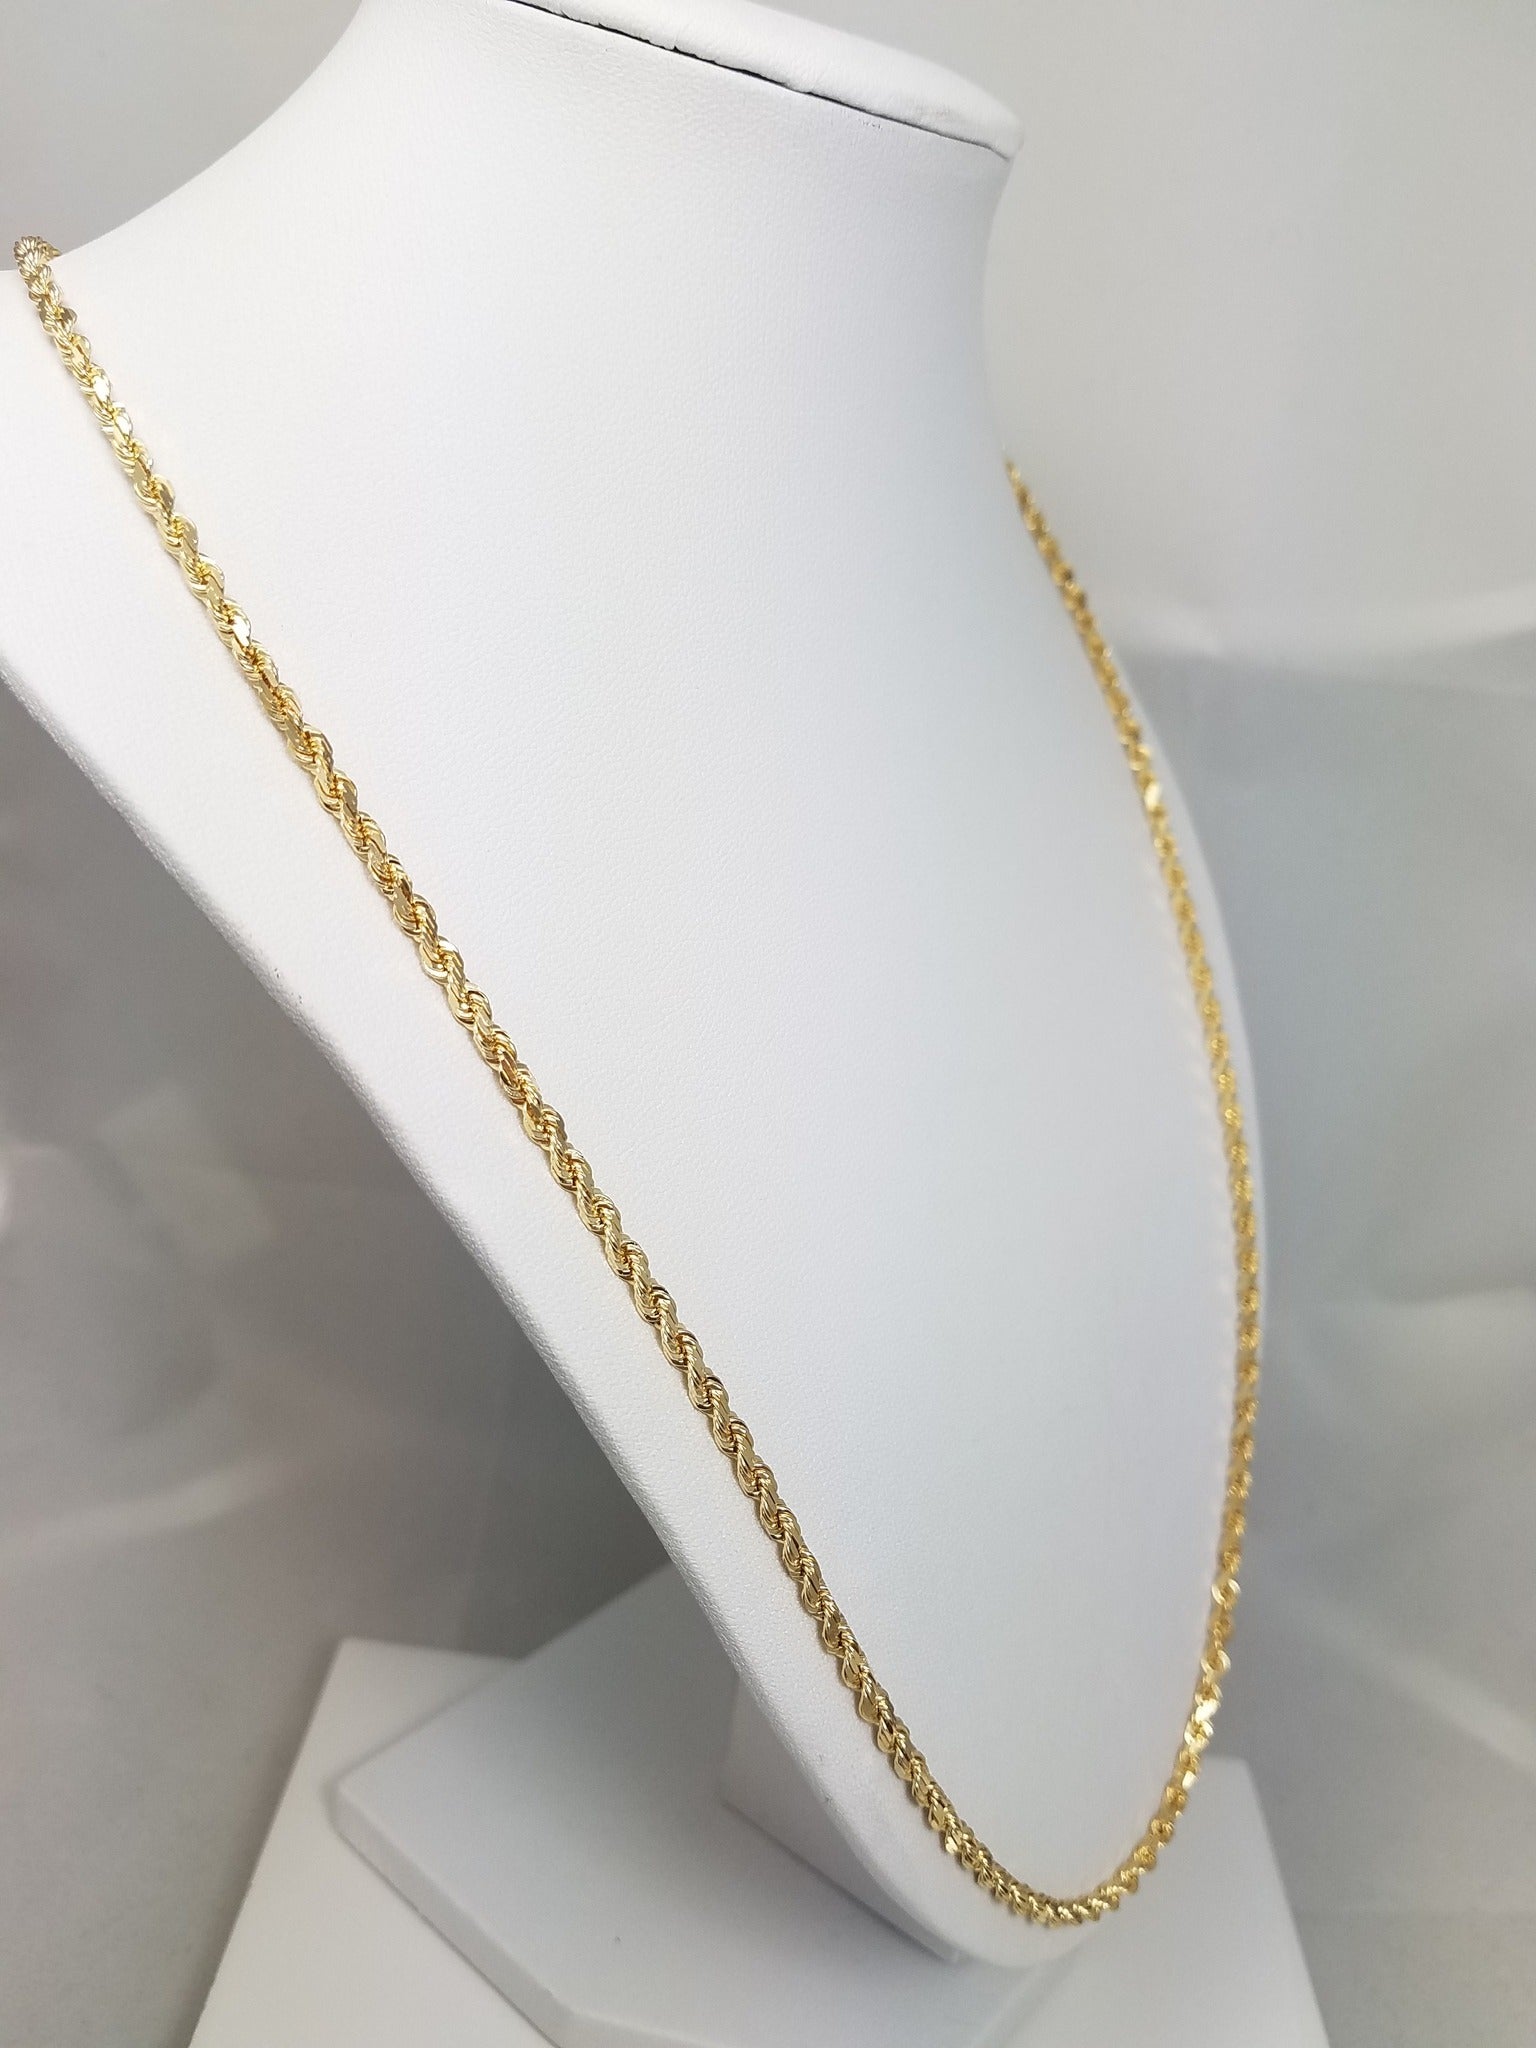 24" 14k Solid Yellow Gold Diamond Cut Rope Chain Necklace